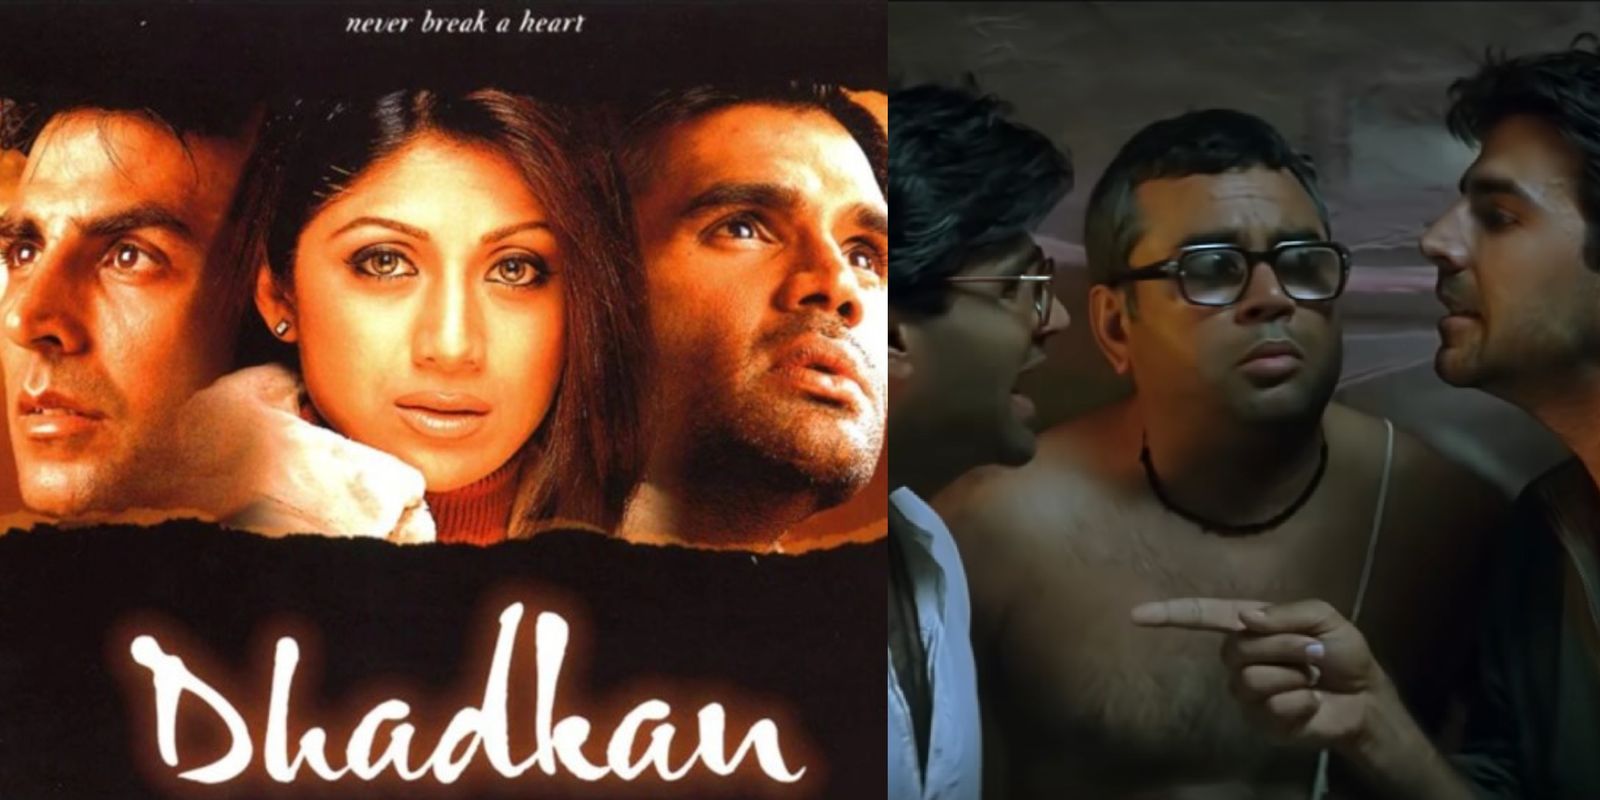 Suniel Shetty Has Already Decided The Cast Of Dhadkan 2 And It Has Akshay Kumar-Shilpa Shetty Connection, Read On